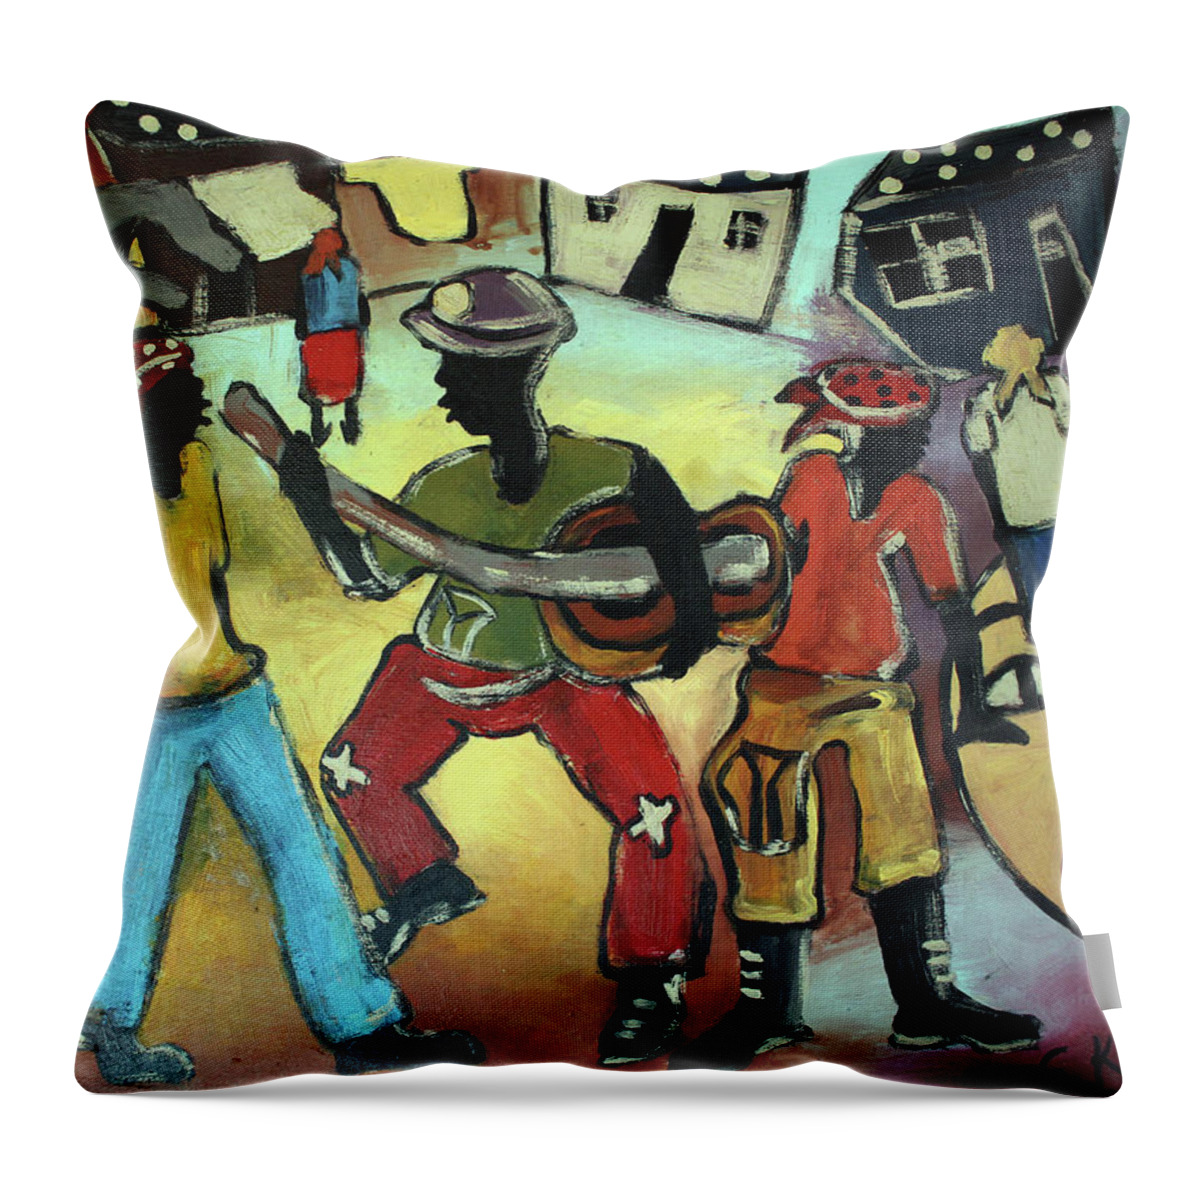  Throw Pillow featuring the painting Street Band by Eli Kobeli